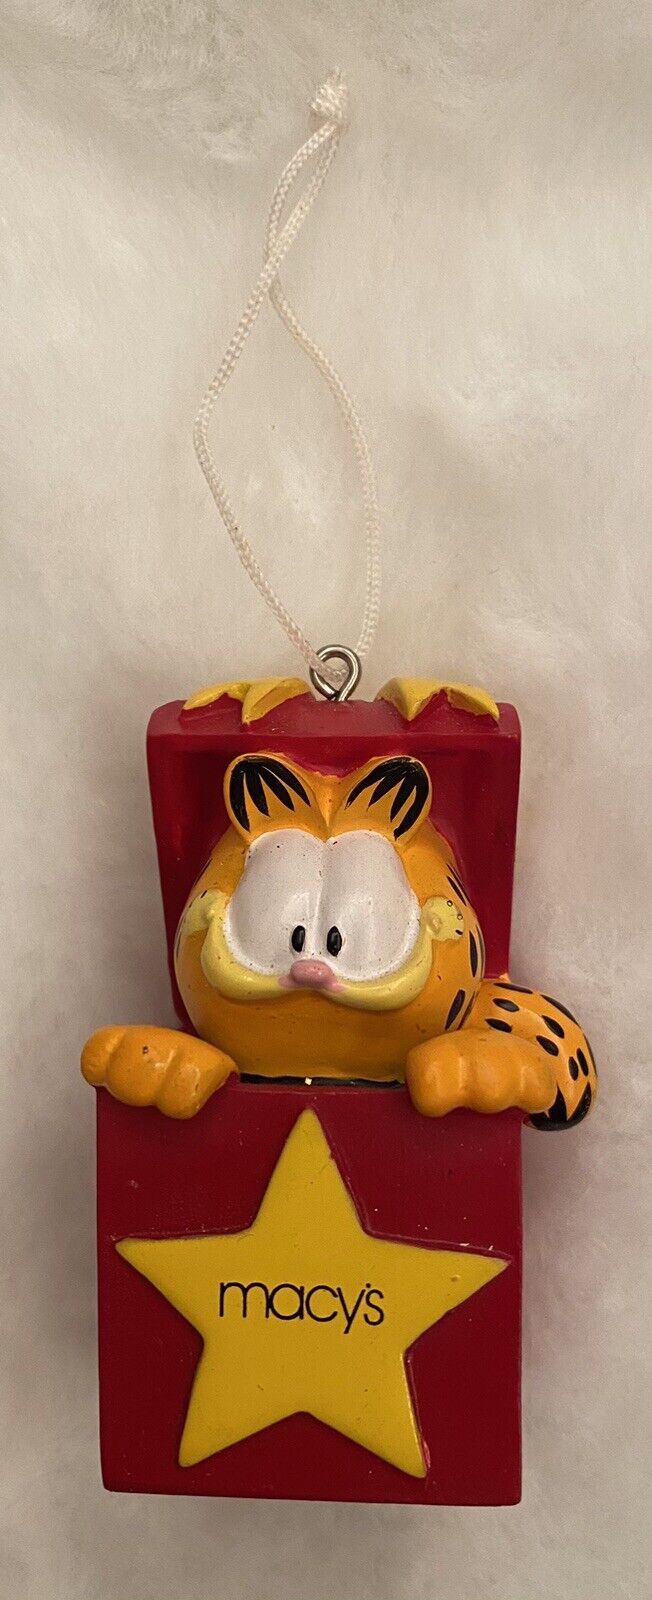 2003 Macy\'s Garfield Collectible Christmas Ornament Red Box Yellow Star